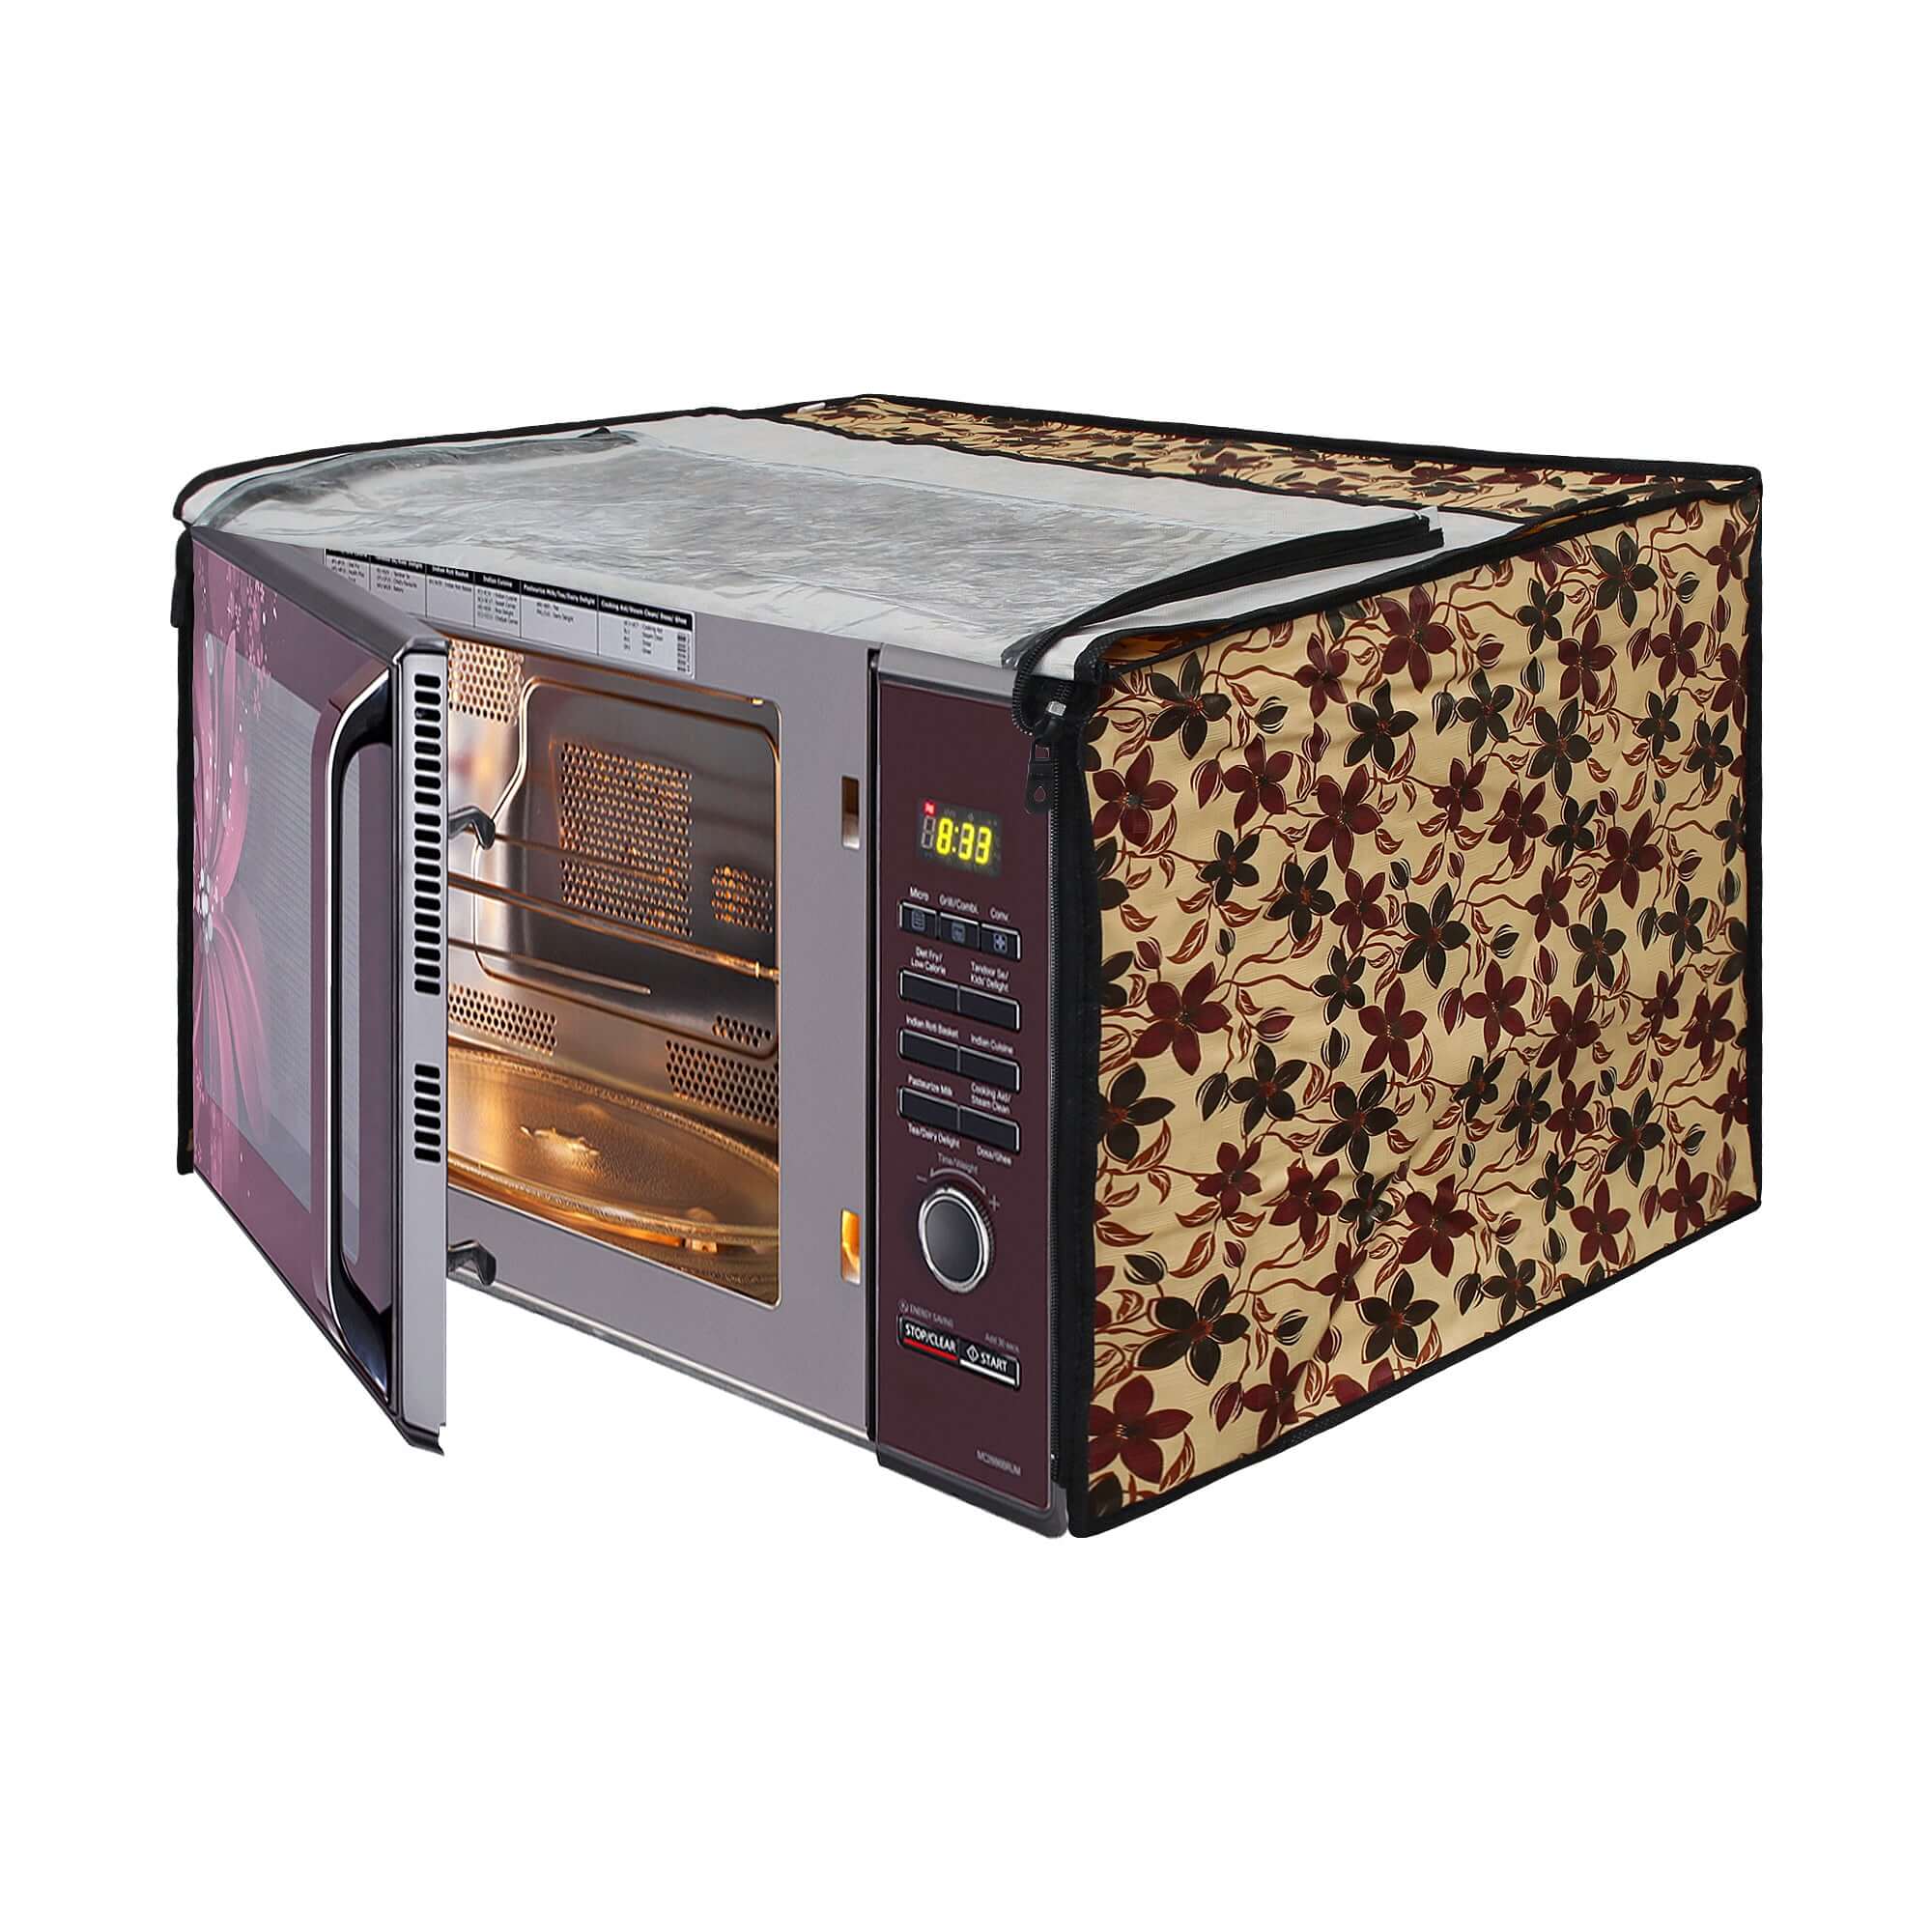 Microwave Oven Cover With Adjustable Front Zipper, SA04 - Dream Care Furnishings Private Limited